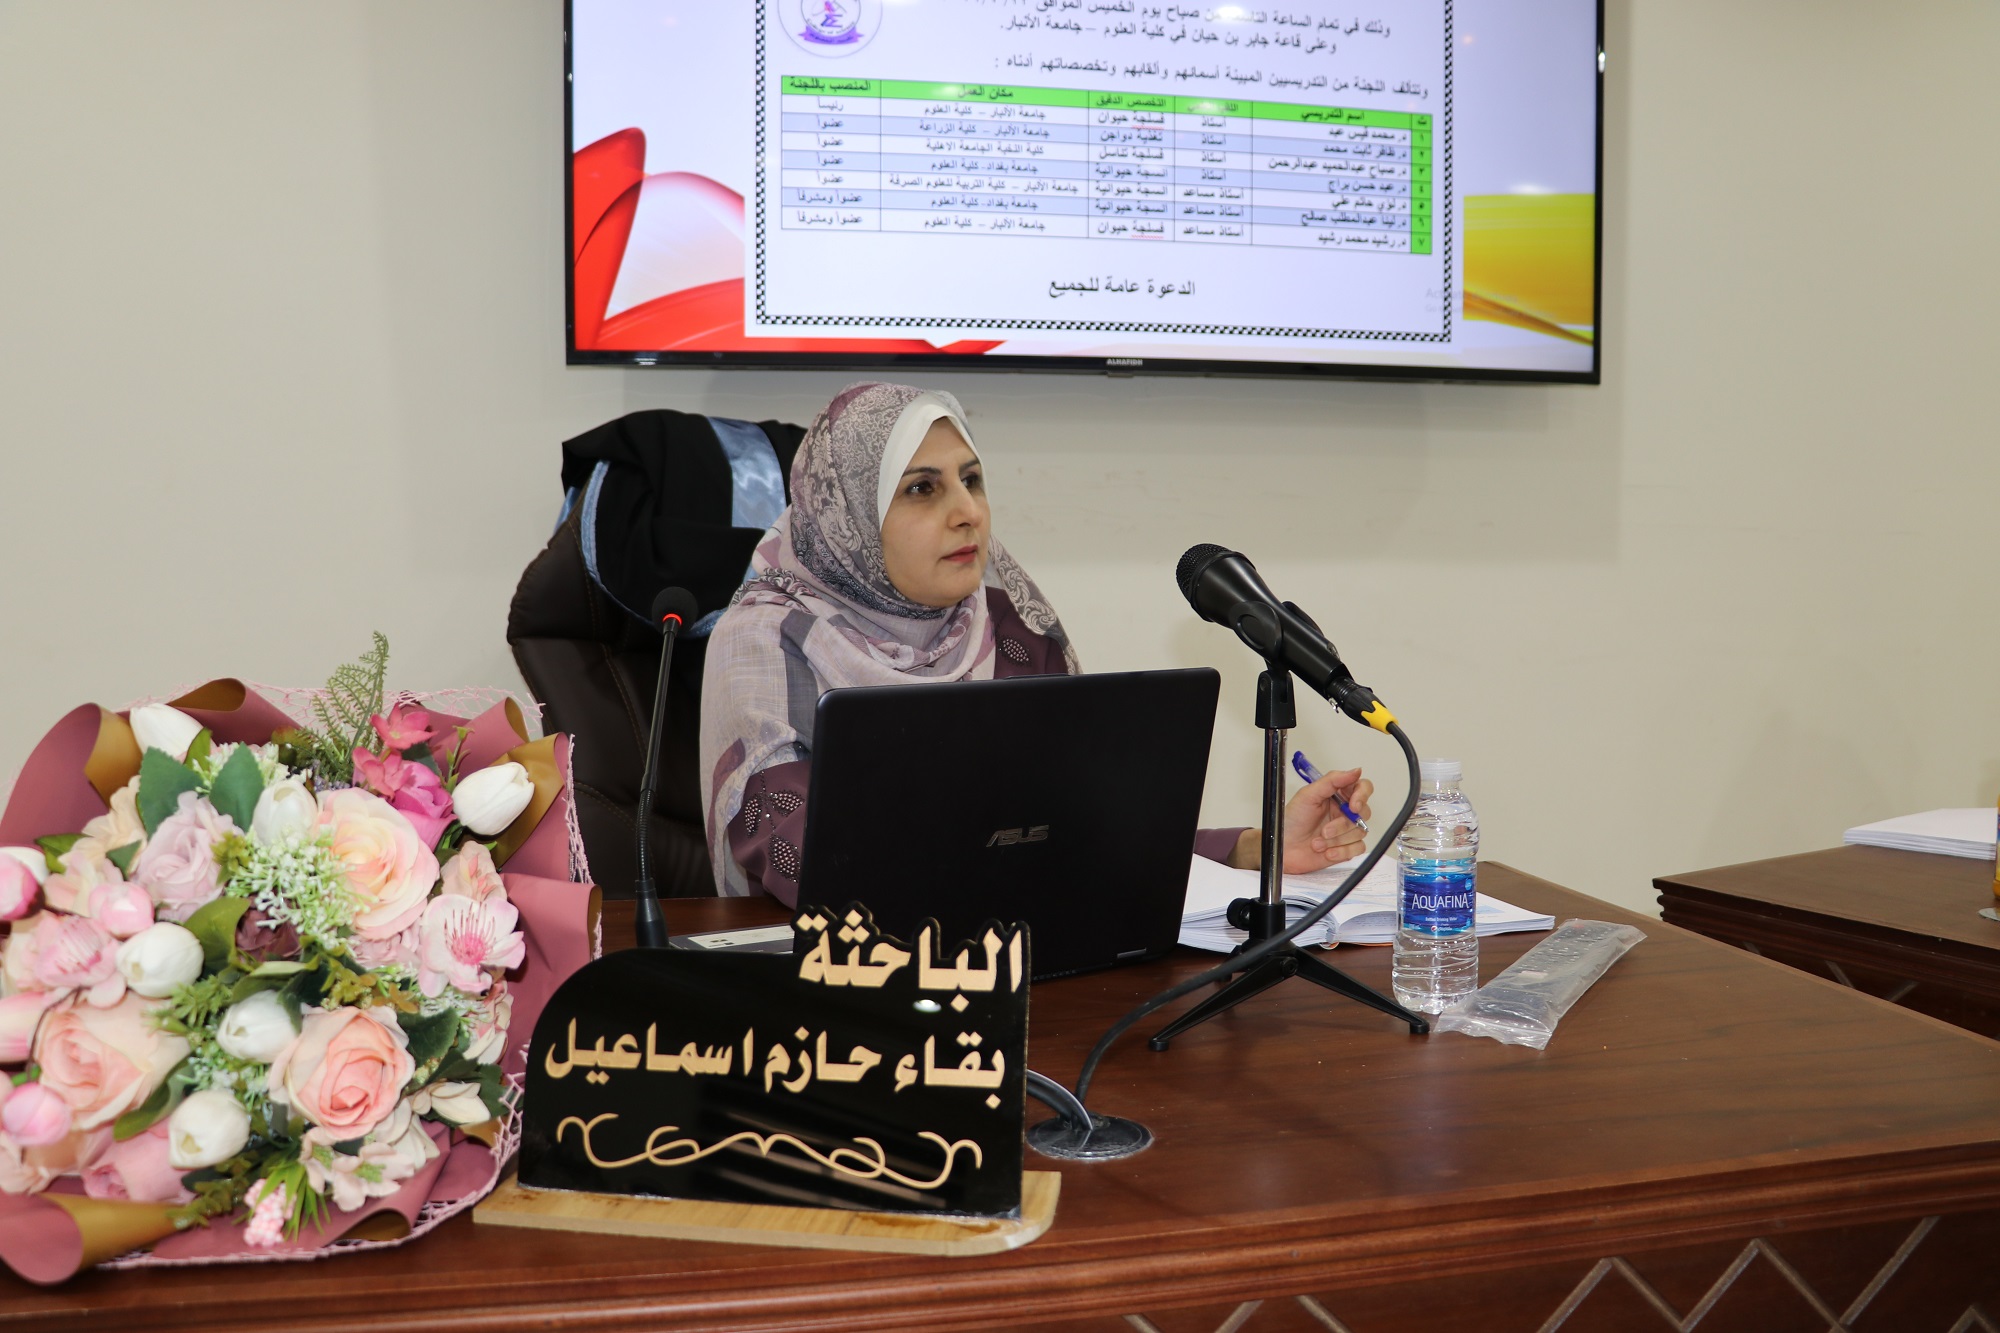 Discussion of a doctoral thesis for the student (Baqaa Hazim Ismail)